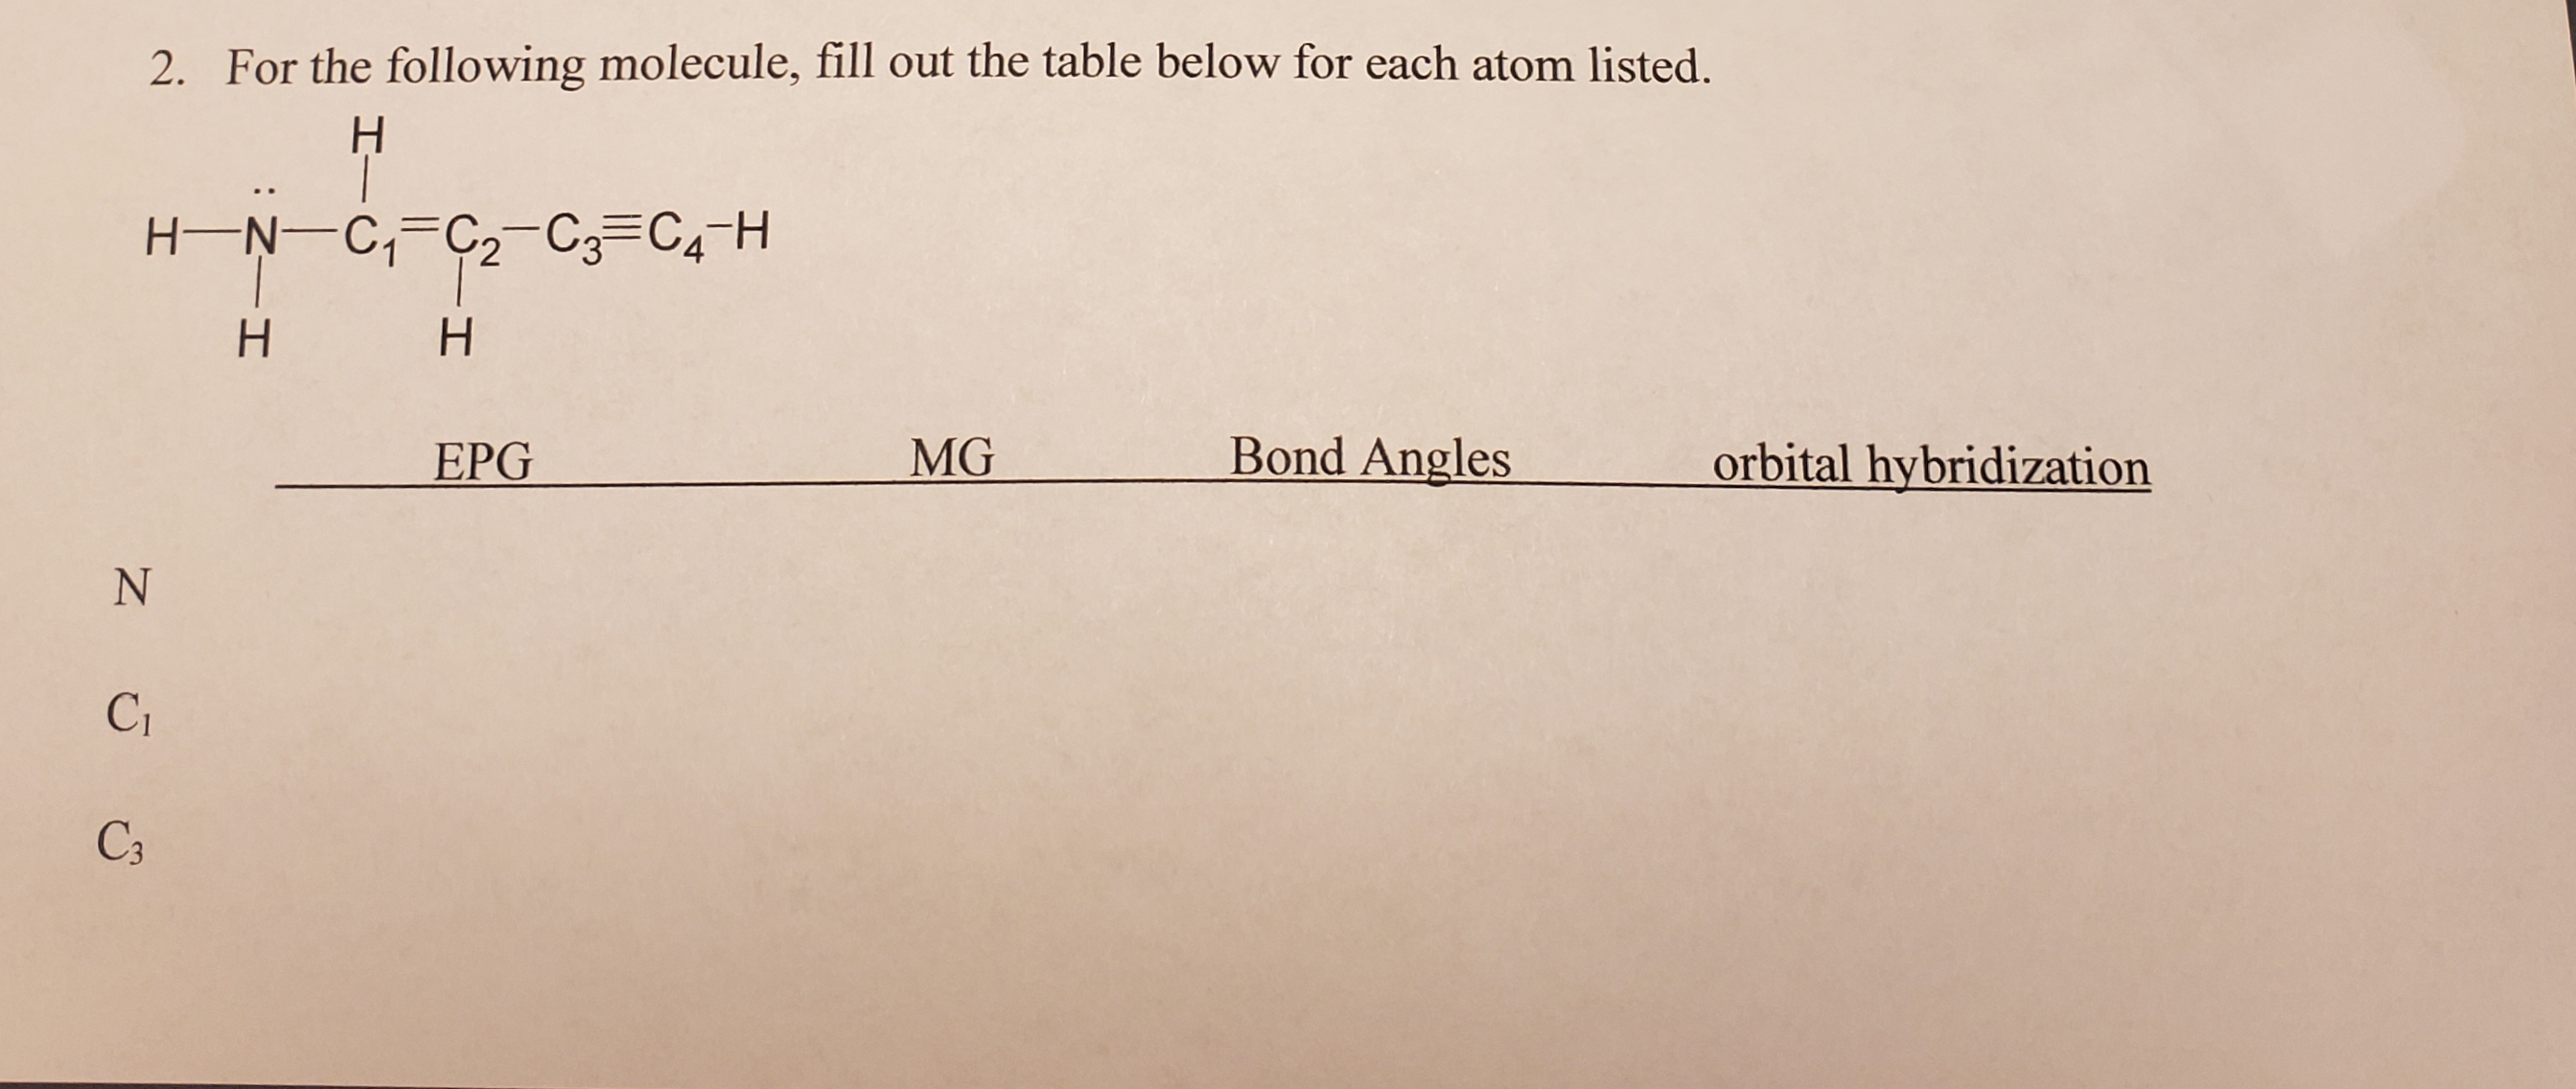 2. For the following molecule, fill out the table below for each atom listed.
Н
H-Ņ-C,=C2-C3=C4-H
H.
Н
EPG
MG
Bond Angles
orbital hybridization
Cт
C3
